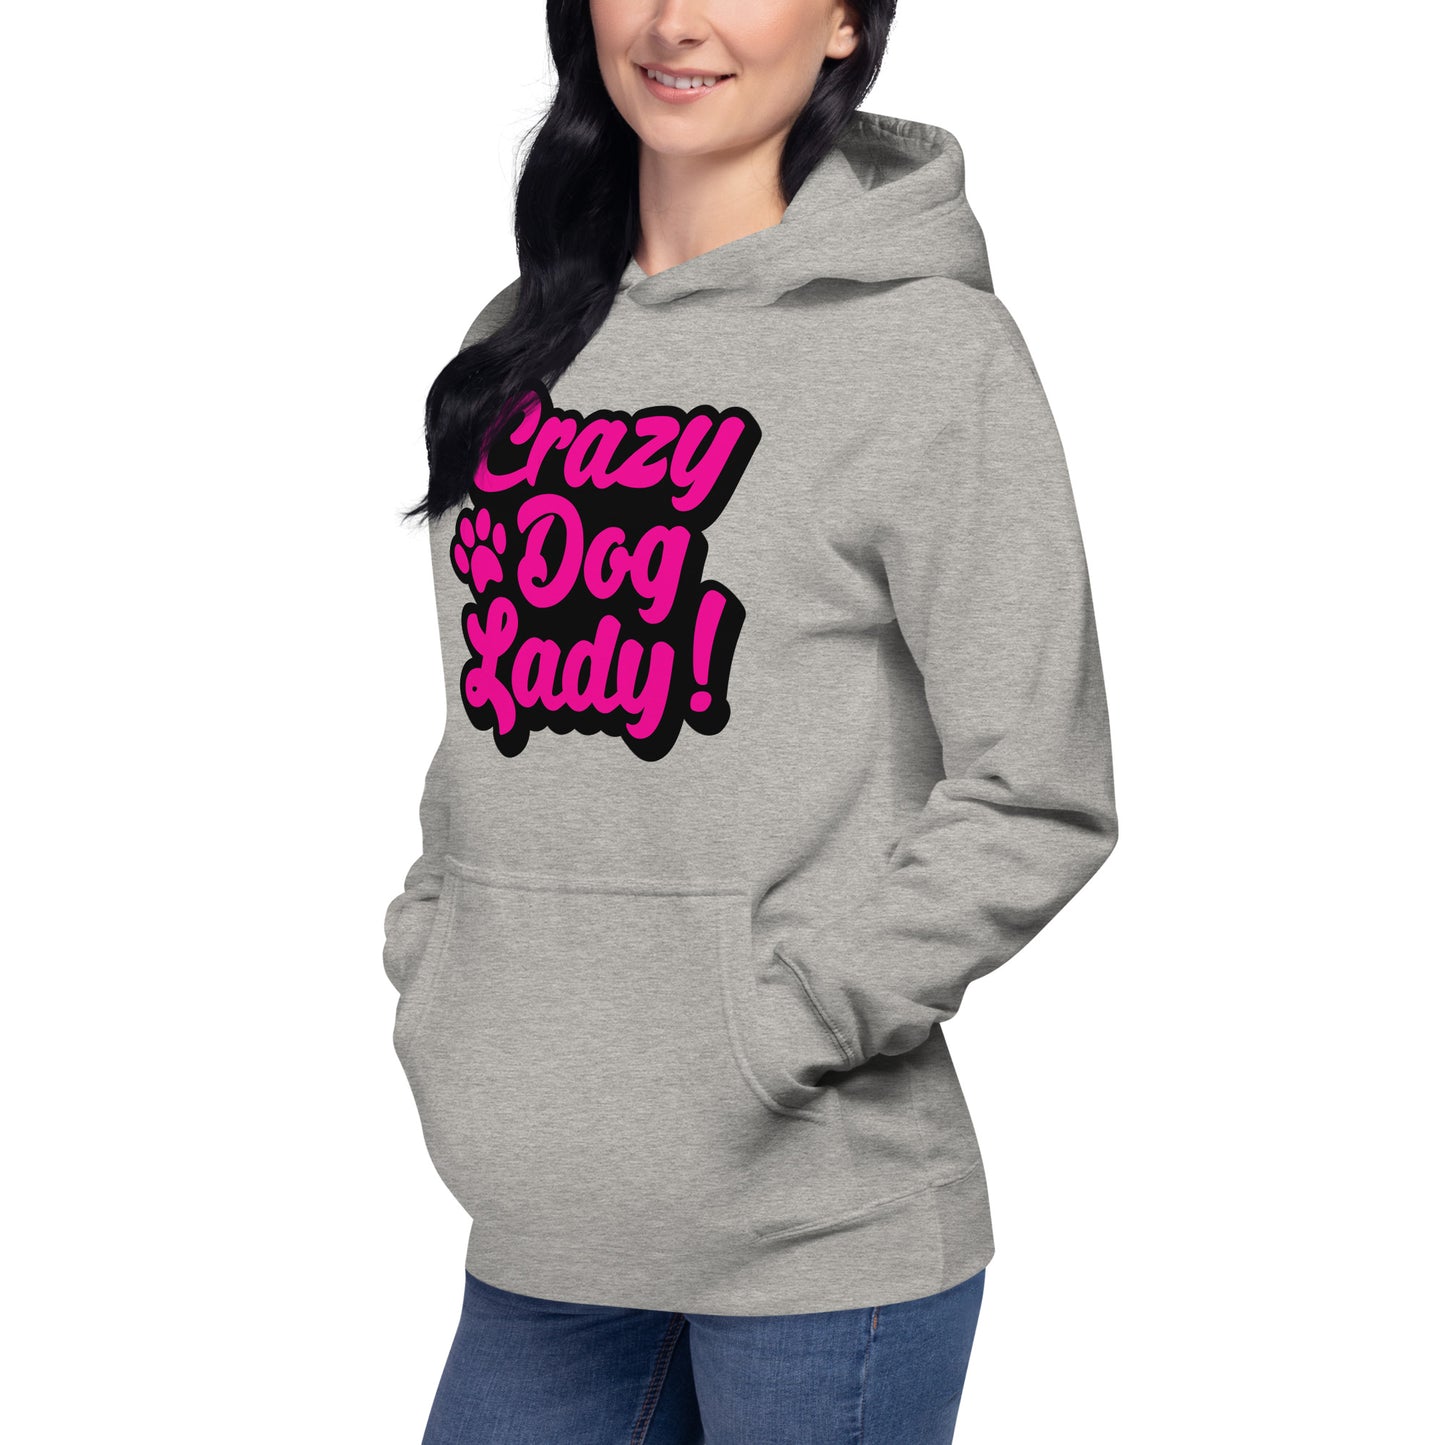 Crazy Dog Lady Unisex Carbon Grey Hoodie by Dog Artistry 